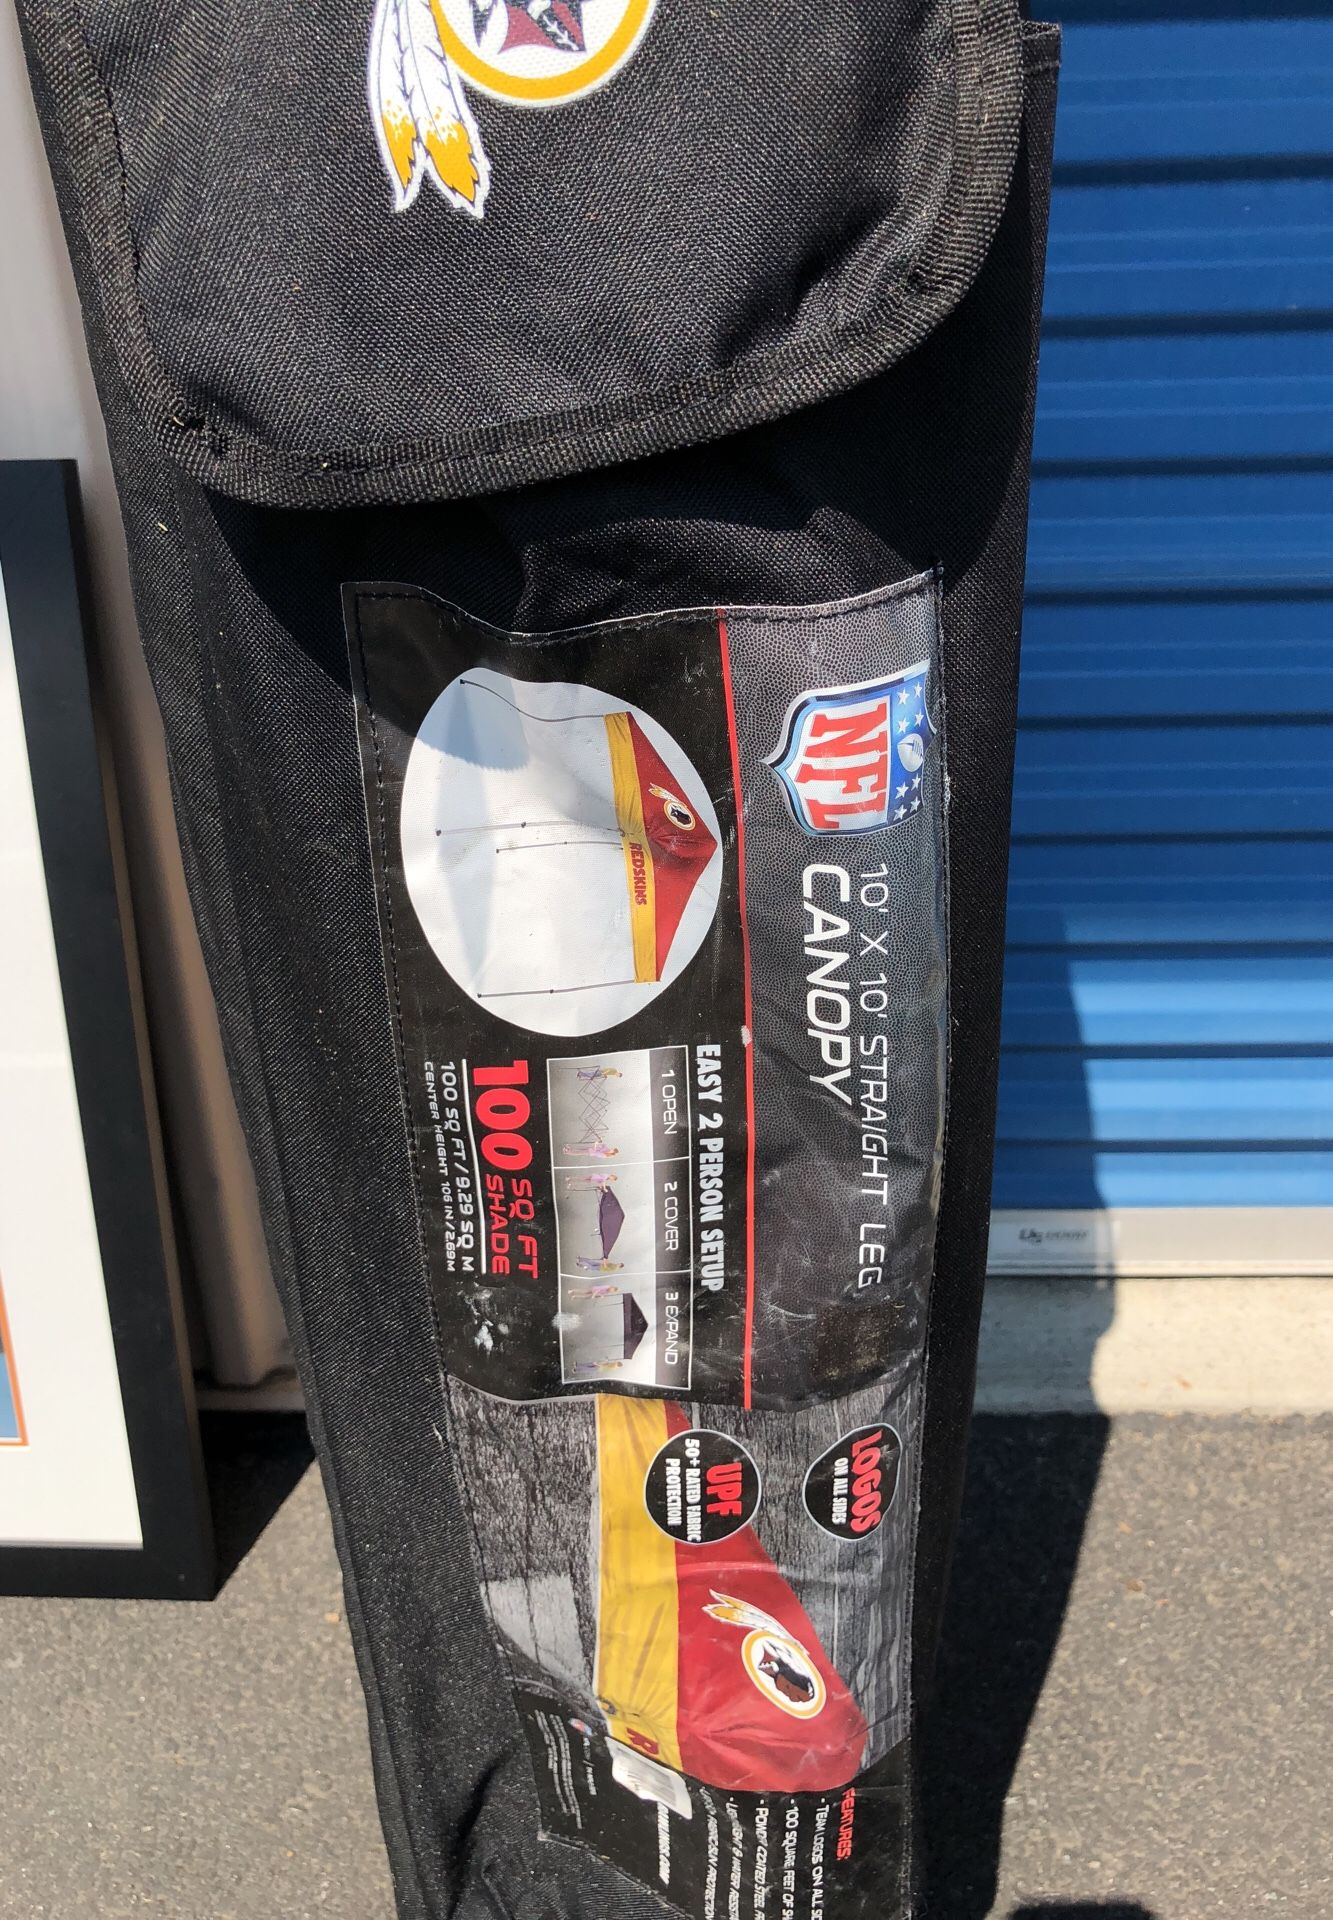 10 x 10 Redskins Canopy tent